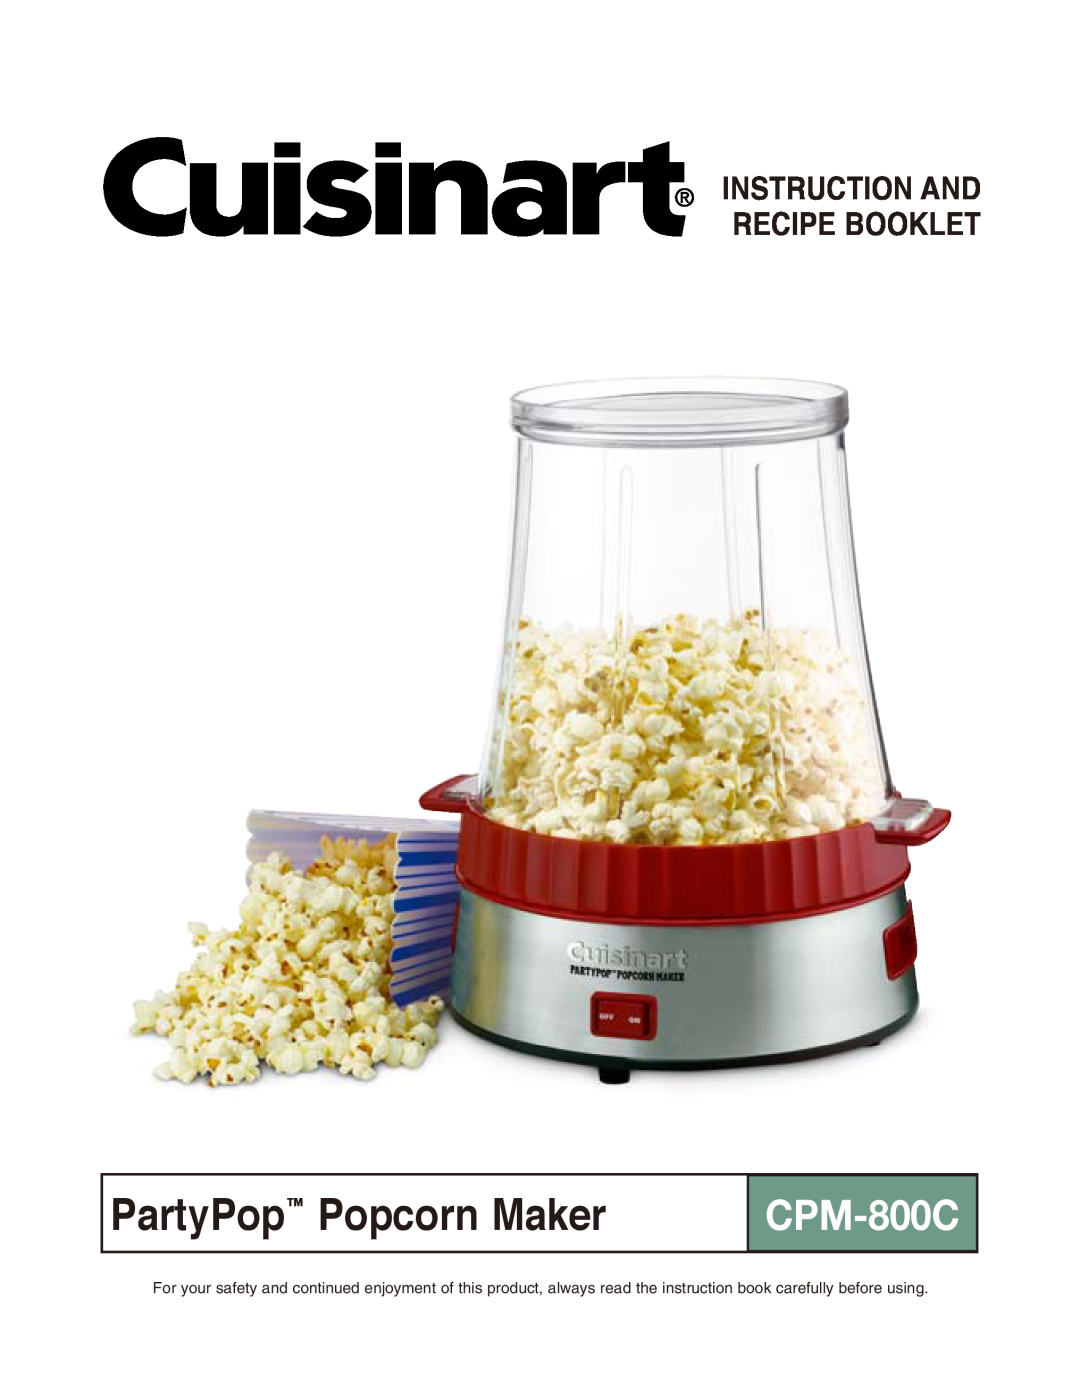 Cuisinart CPM-800C manual Instruction And Recipe Booklet, PartyPop Popcorn Maker 